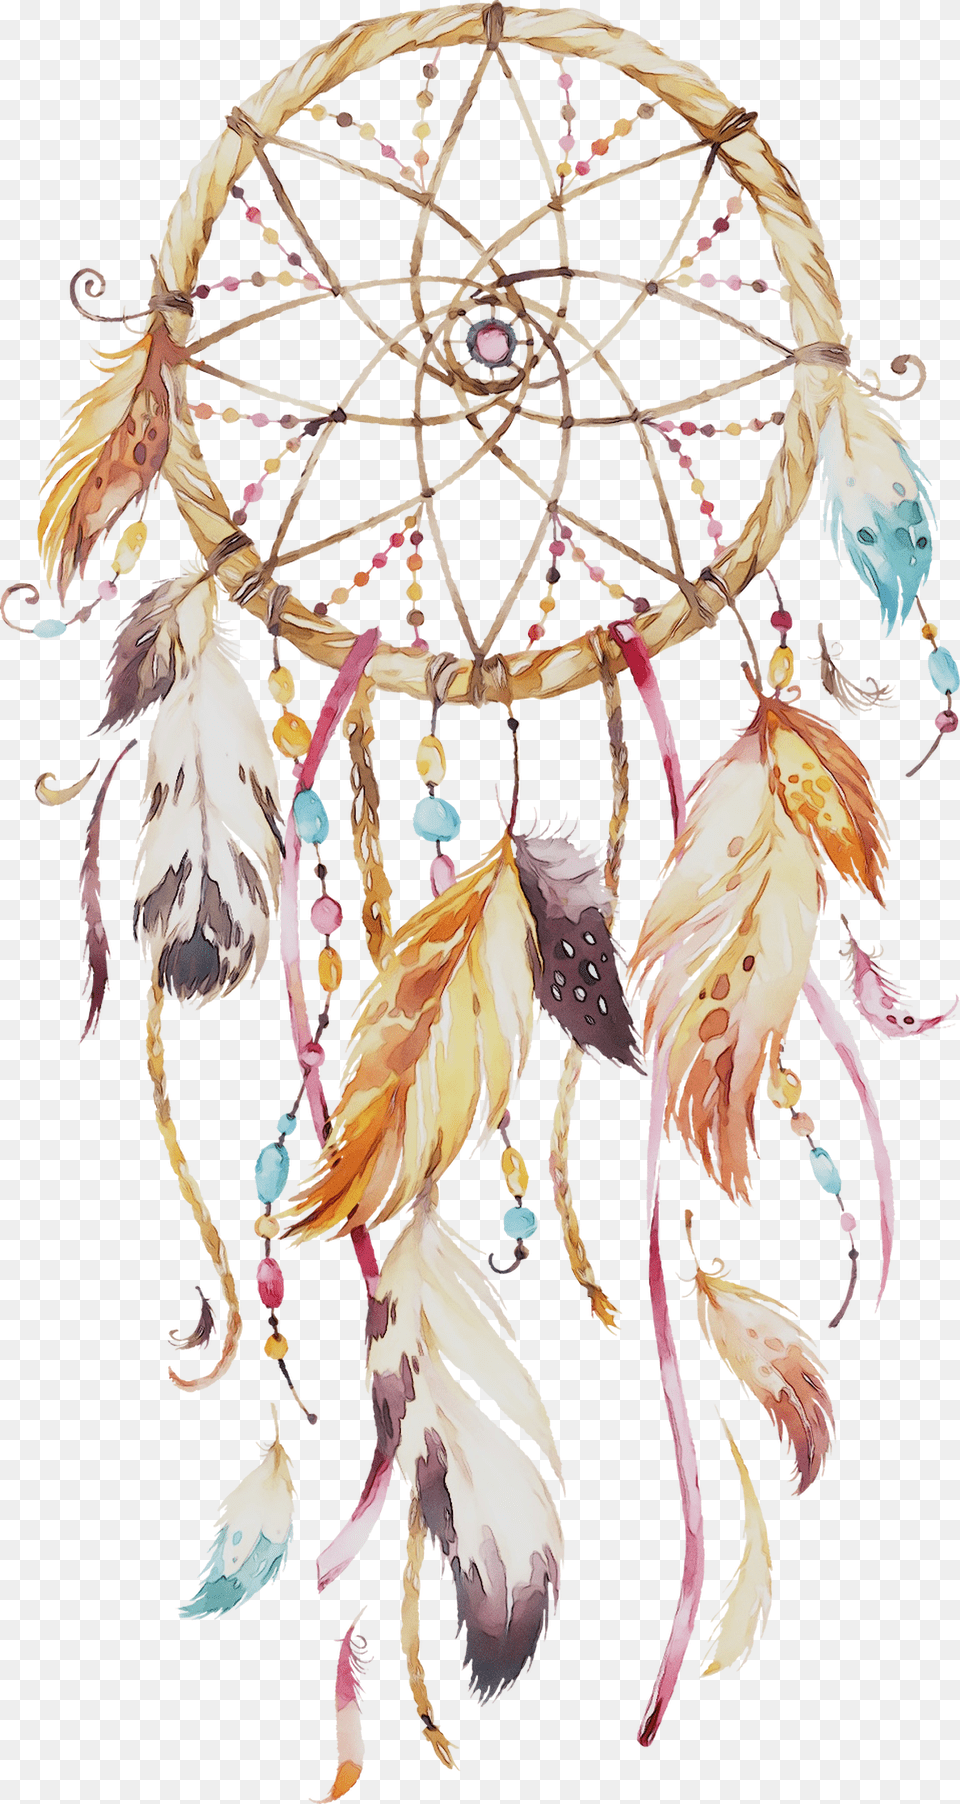 Dreamcatcher Painting Watercolor Painting Feather Pink Dream Catcher Art, Accessories, Jewelry, Handicraft, Wedding Free Png Download